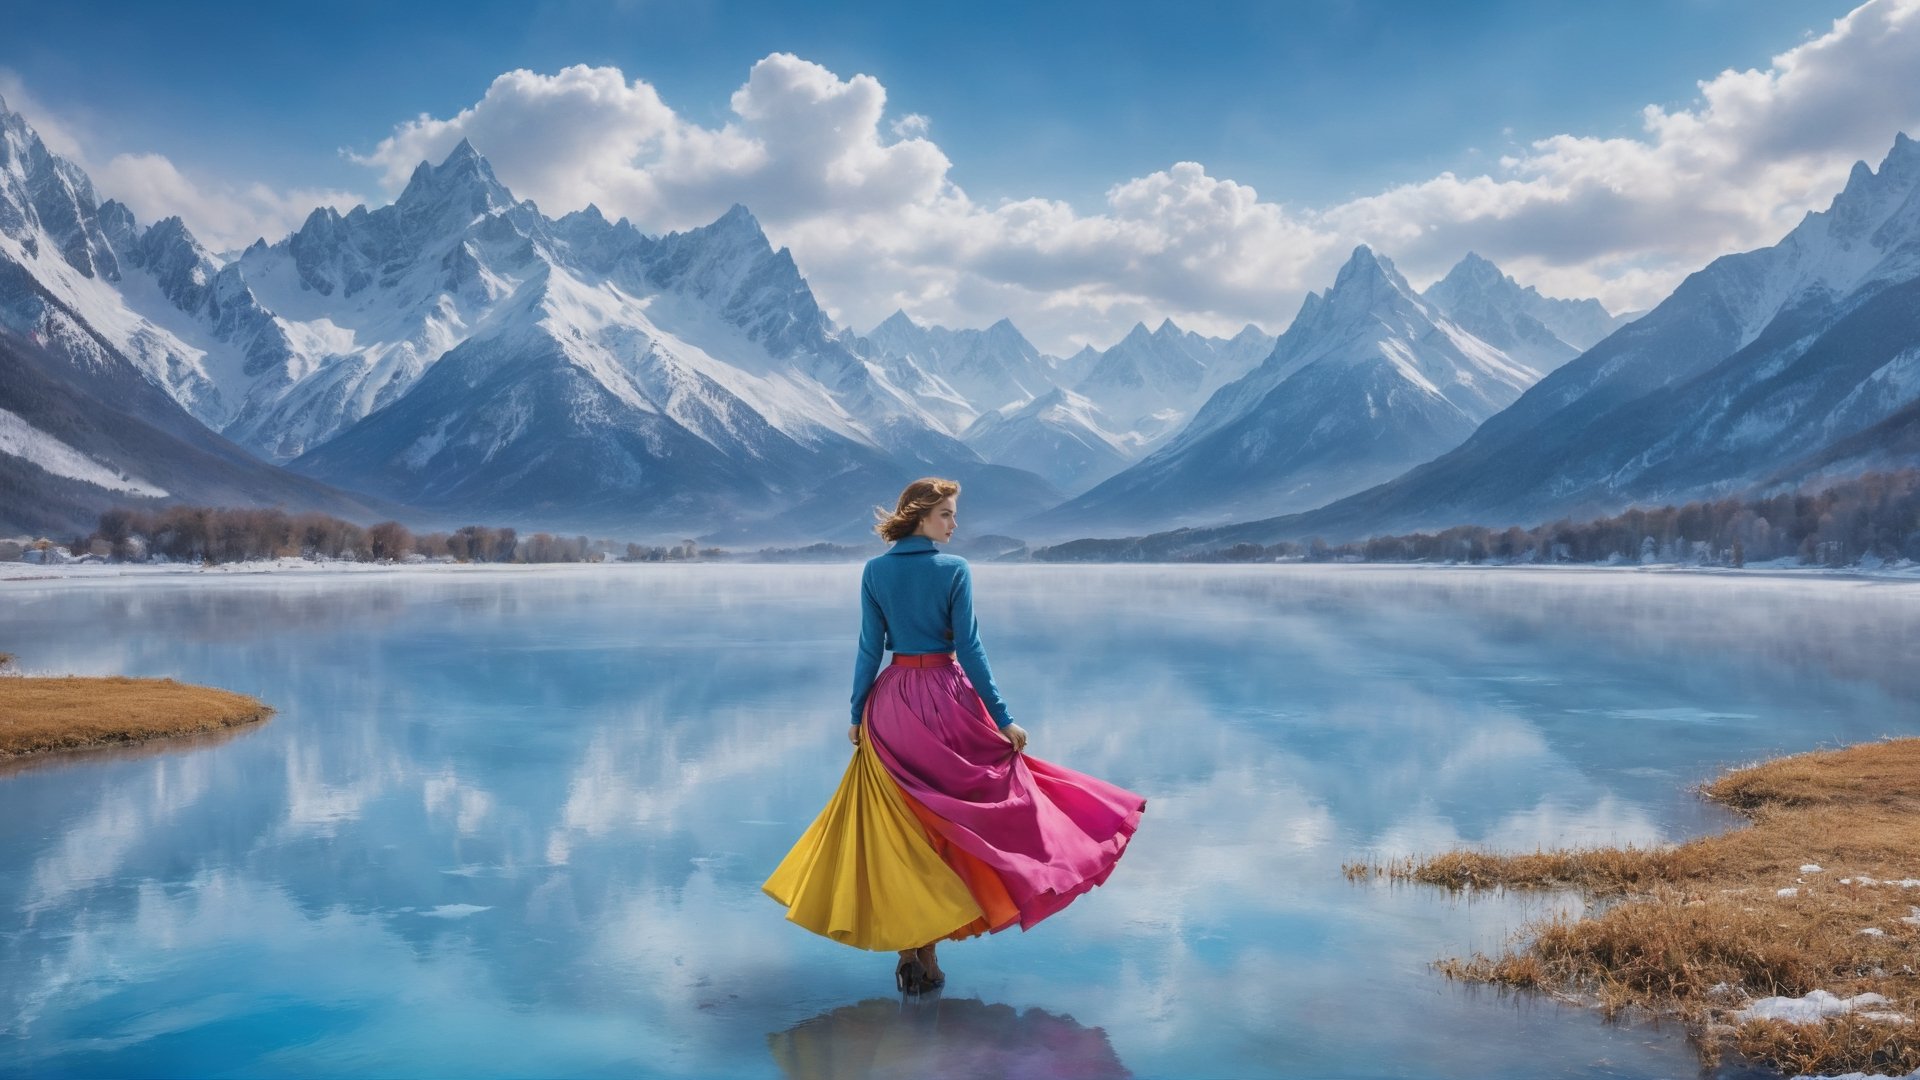 In this marvelous work of art, ,this high-quality photograph is a visual treat that radiates charm, inviting viewers to immerse themselves in its delightful atmosphere. Surrealist art Leonardo Style, ColorArt,
 A woman stand on a frozen lake, dressed in colorful skirt,  The lake is surrounded by snowy mountains, and the sky is a cloudy, blue winter day